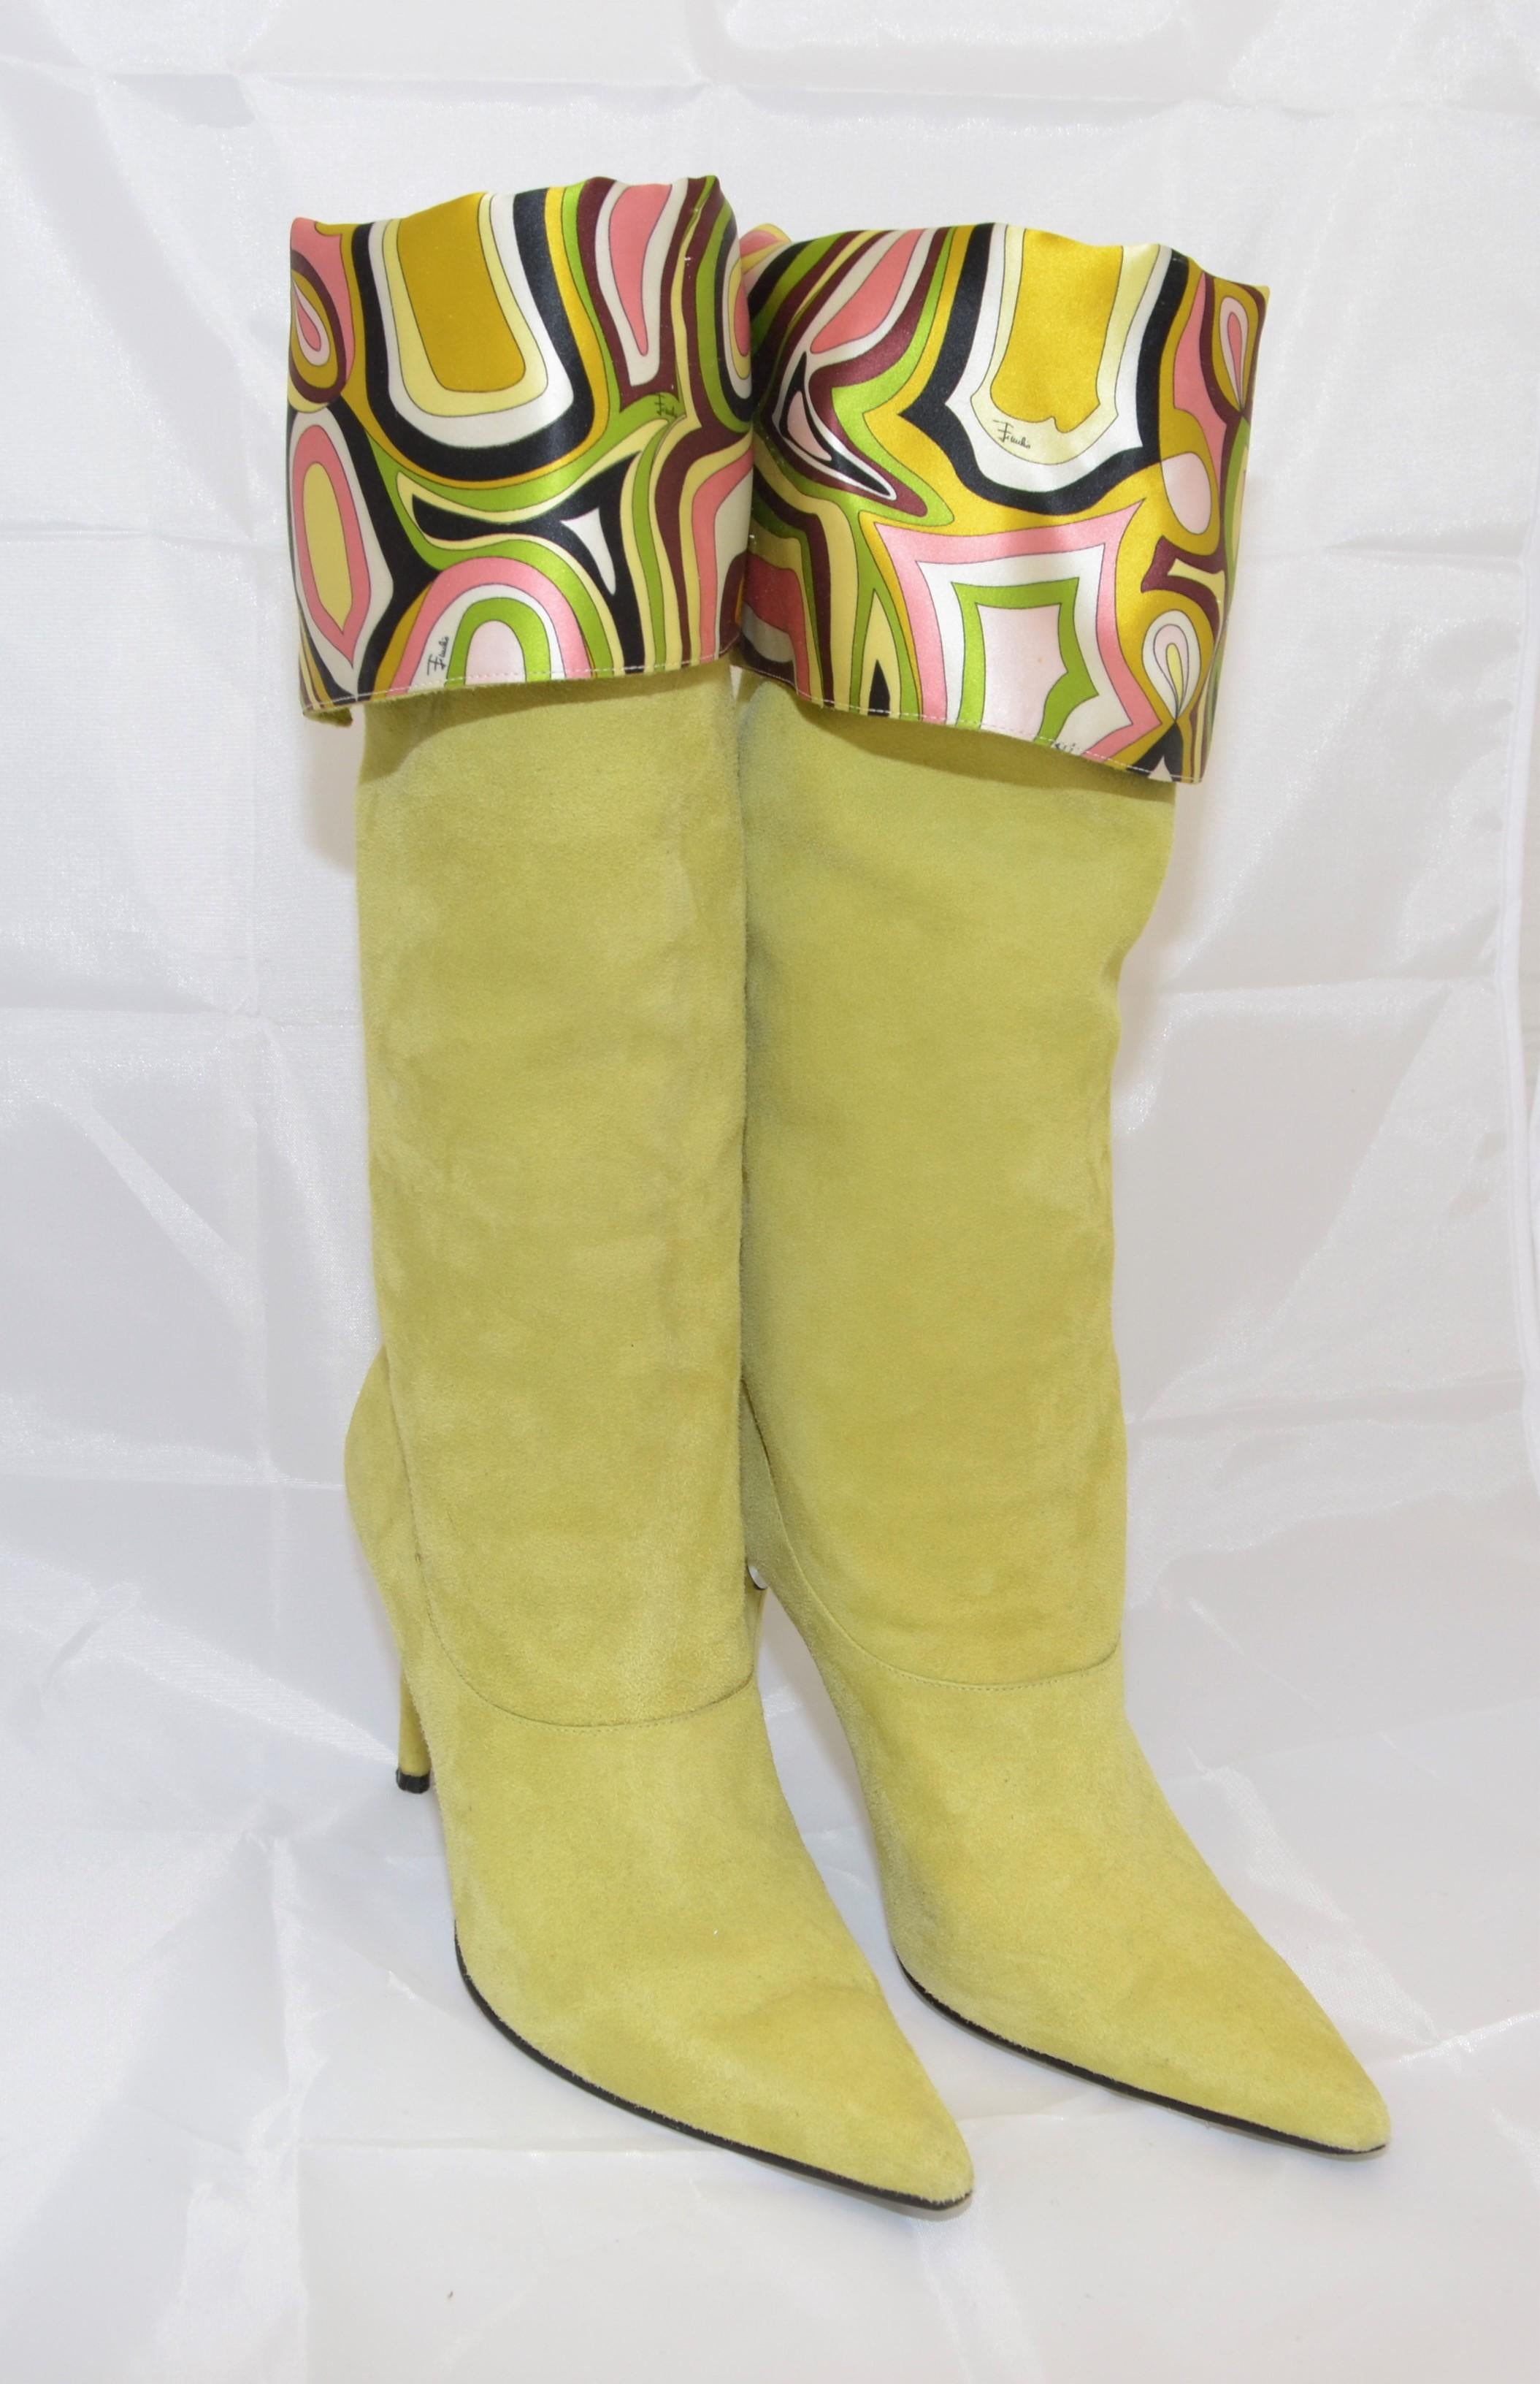 Emilio Pucci lime green suede boots features a pointed toe with a printed silk lining. Boots have a slip-on entry, size 39.5. Great pre-owned condition with faint wears to the suede as pictured.

Heel Height - 4''
Shaft - 13''